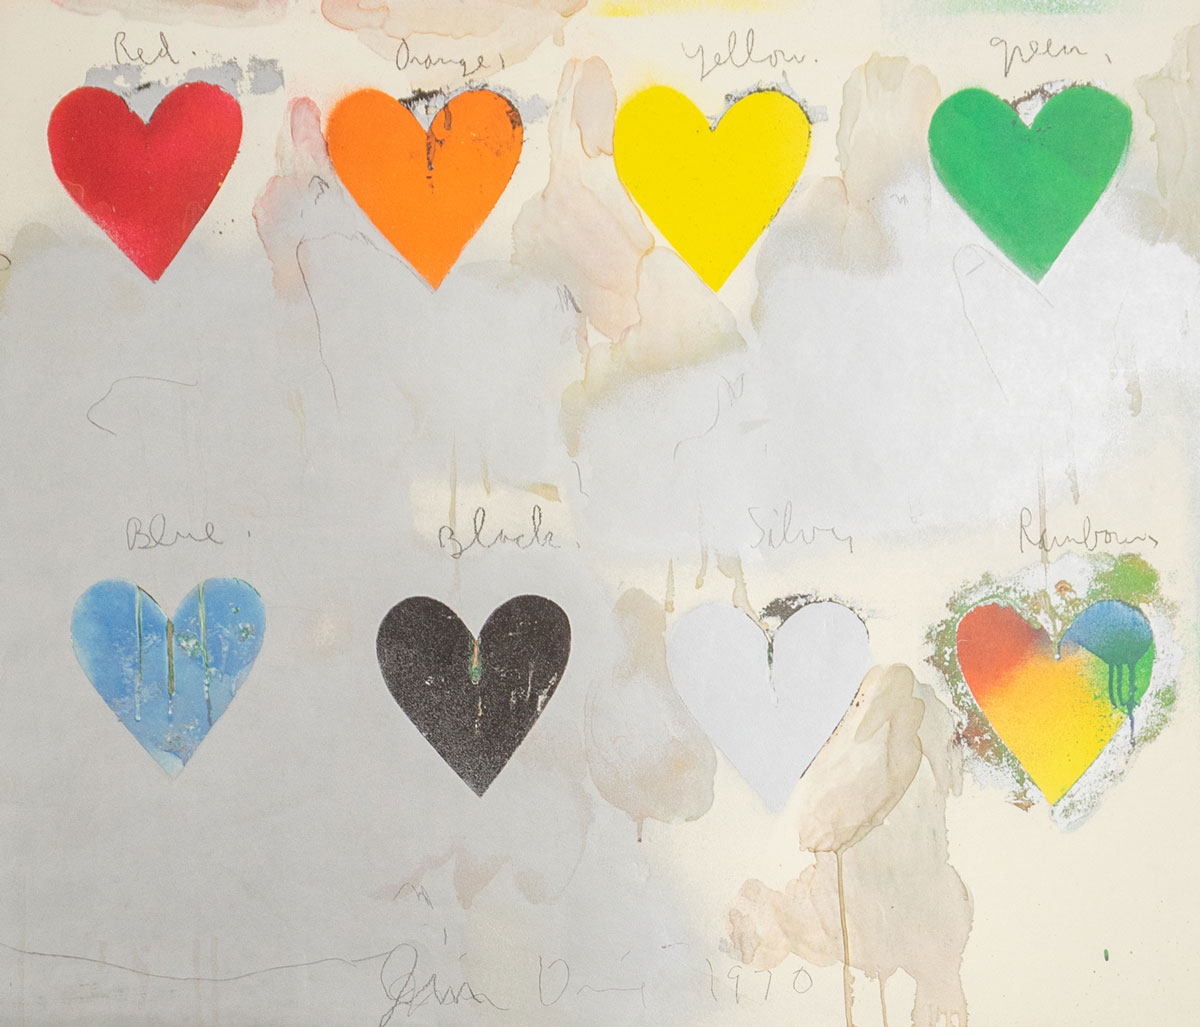 Jim Dine Signed Eight Hearts Print